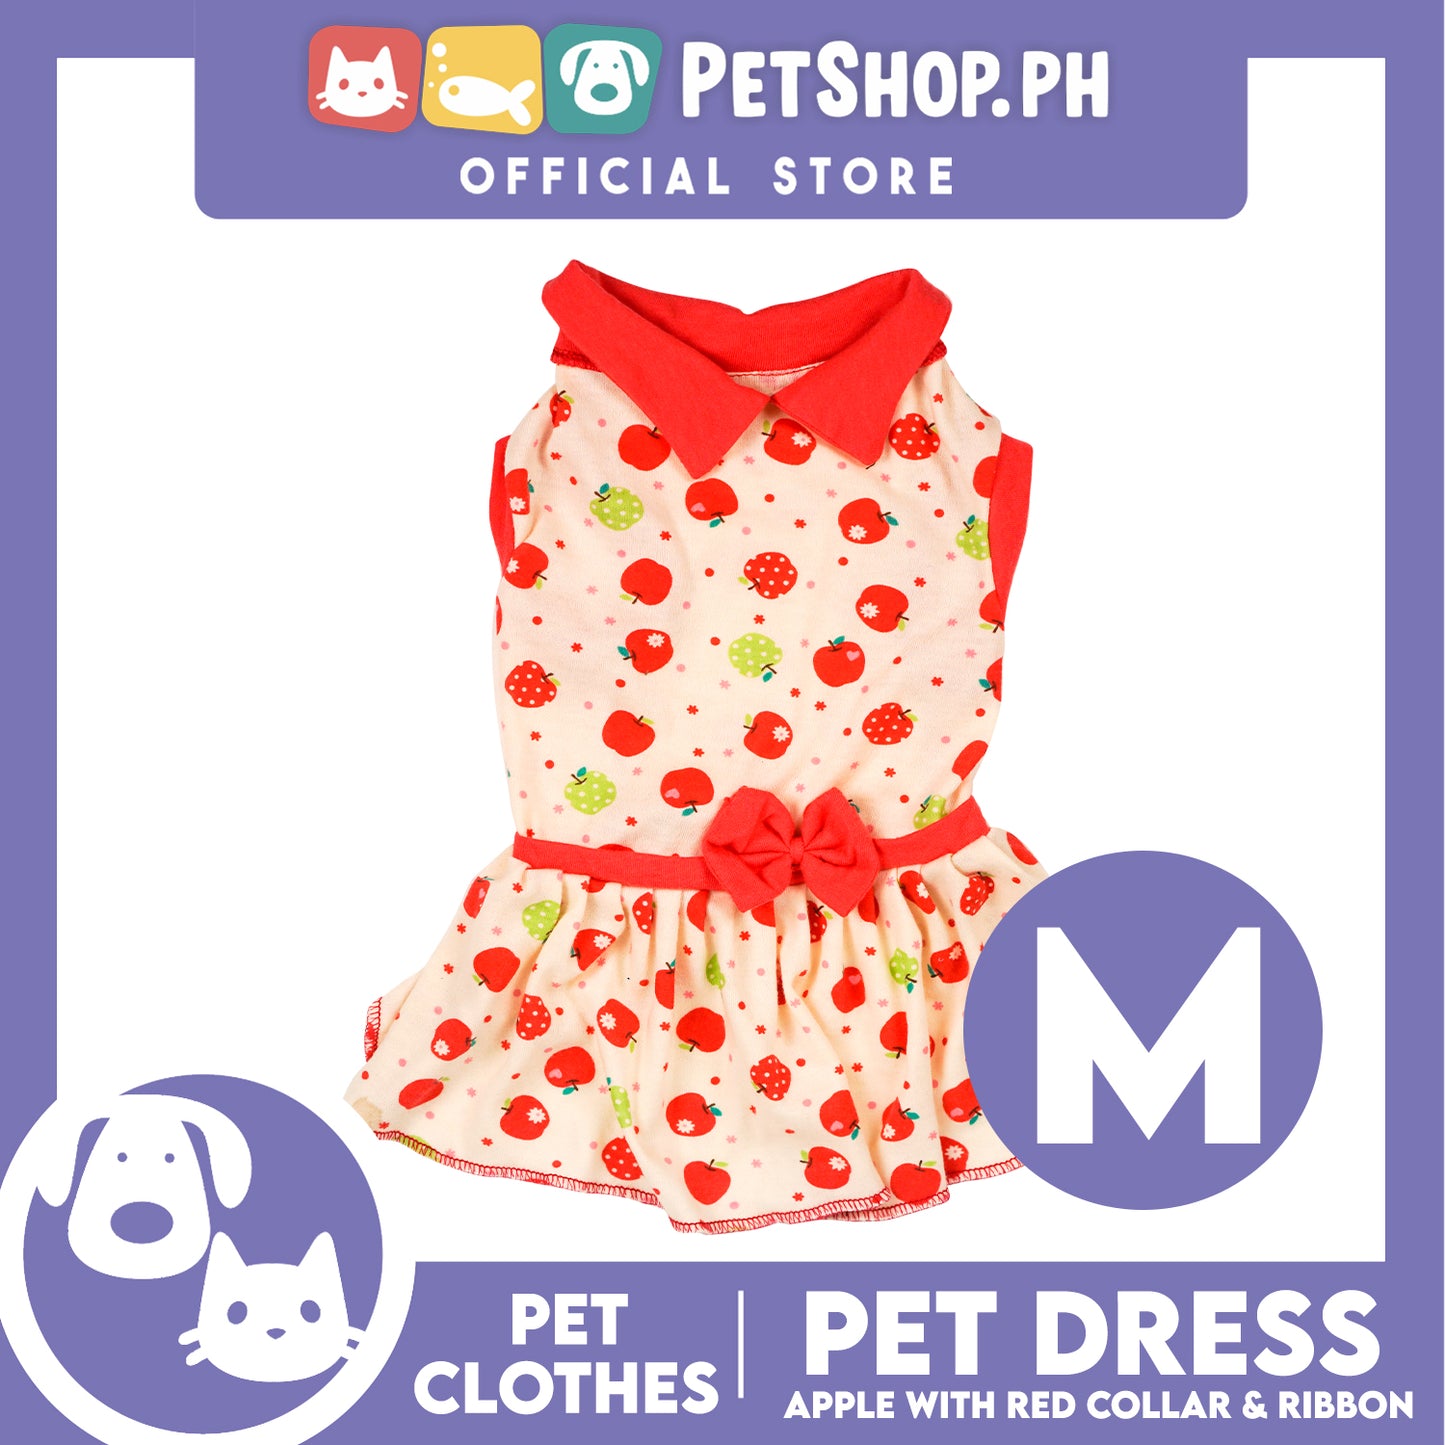 Pet Dress Apple with Red Collar and Ribbon Pet Clothes (Medium) Perfect Fit for Dogs and Cats